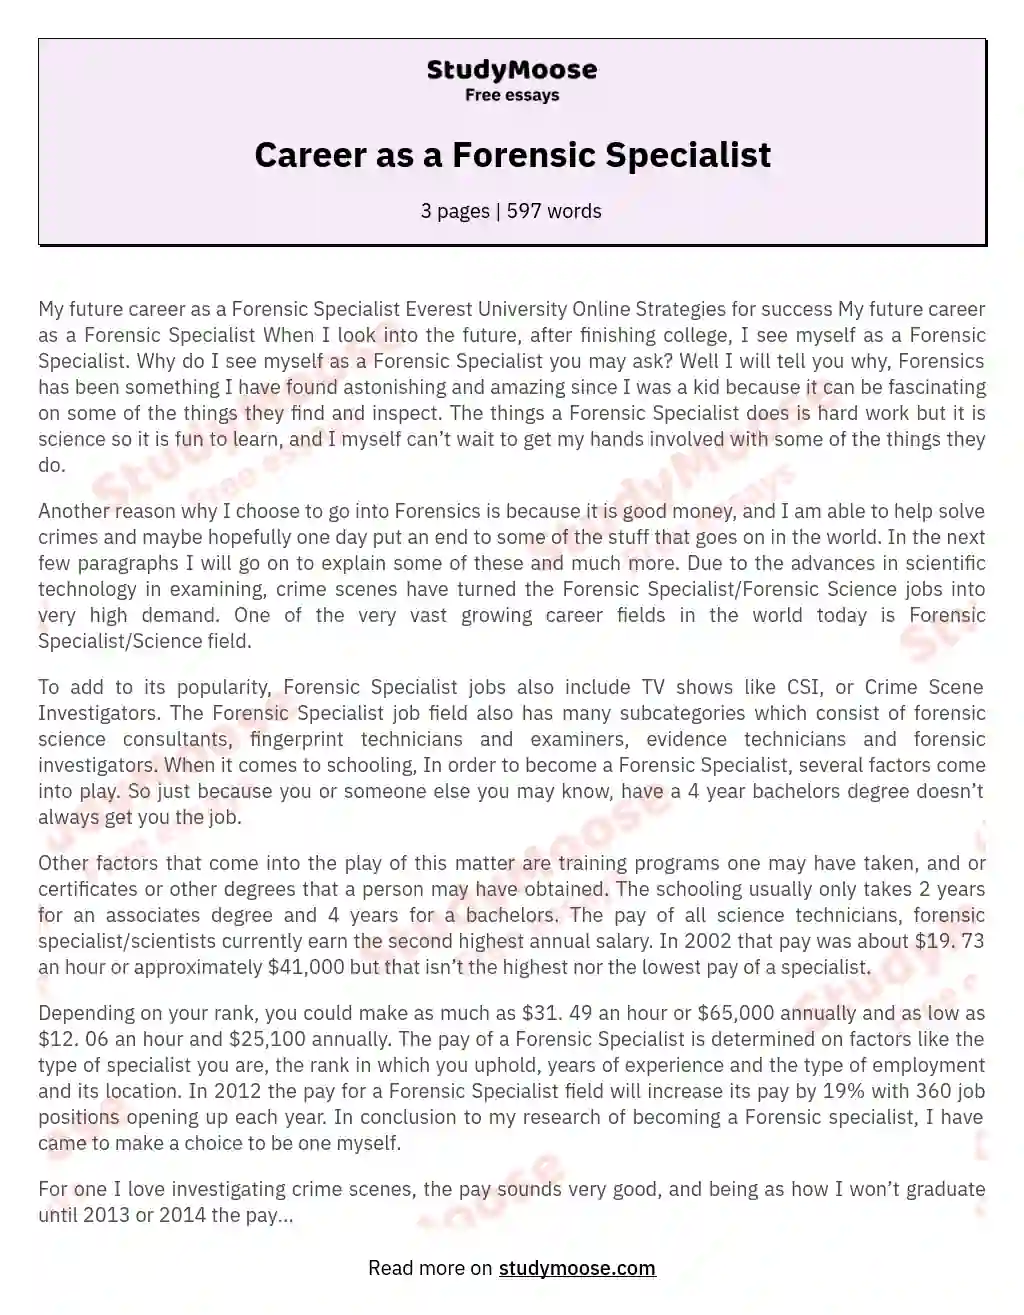 Career as a Forensic Specialist